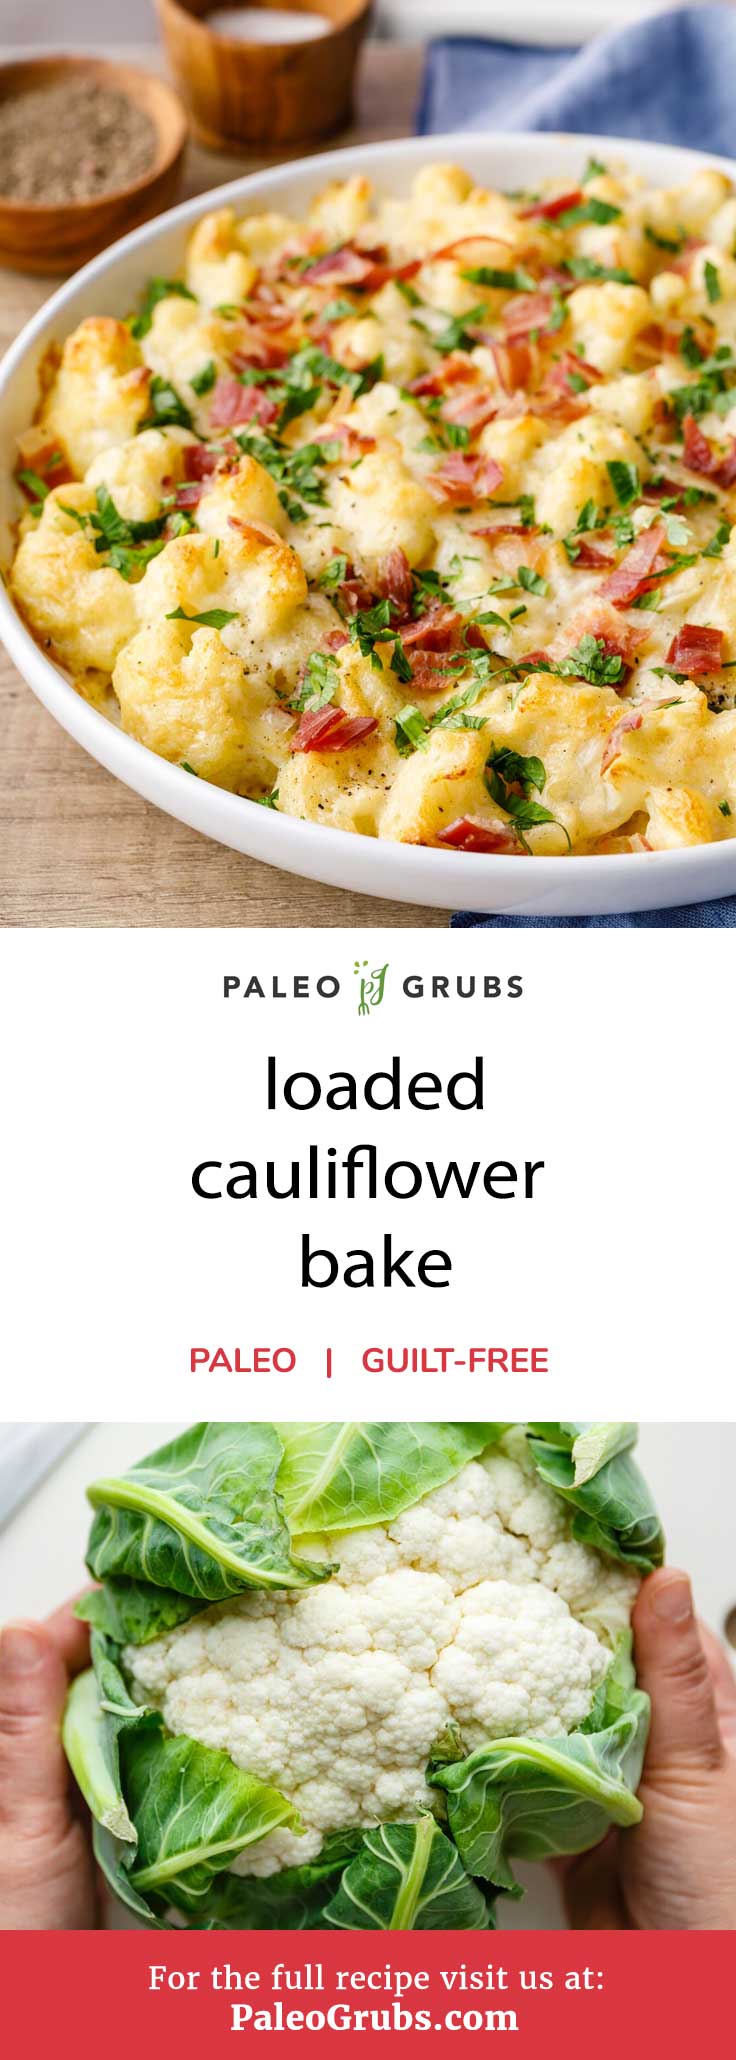 Who needs potatoes when you have cauliflower? This loaded cauliflower bake recipe is living proof of that. It makes a delicious casserole-like meal that (as the name implies) is loaded with healthy cauliflower florets tossed in a delicious sauce mixture of garlic, almond milk, arrowroot flour, and paleo approved mayonnaise. Think that sounds yummy? It gets even better with the topping - a sprinkling of fresh chopped parsley and bacon.